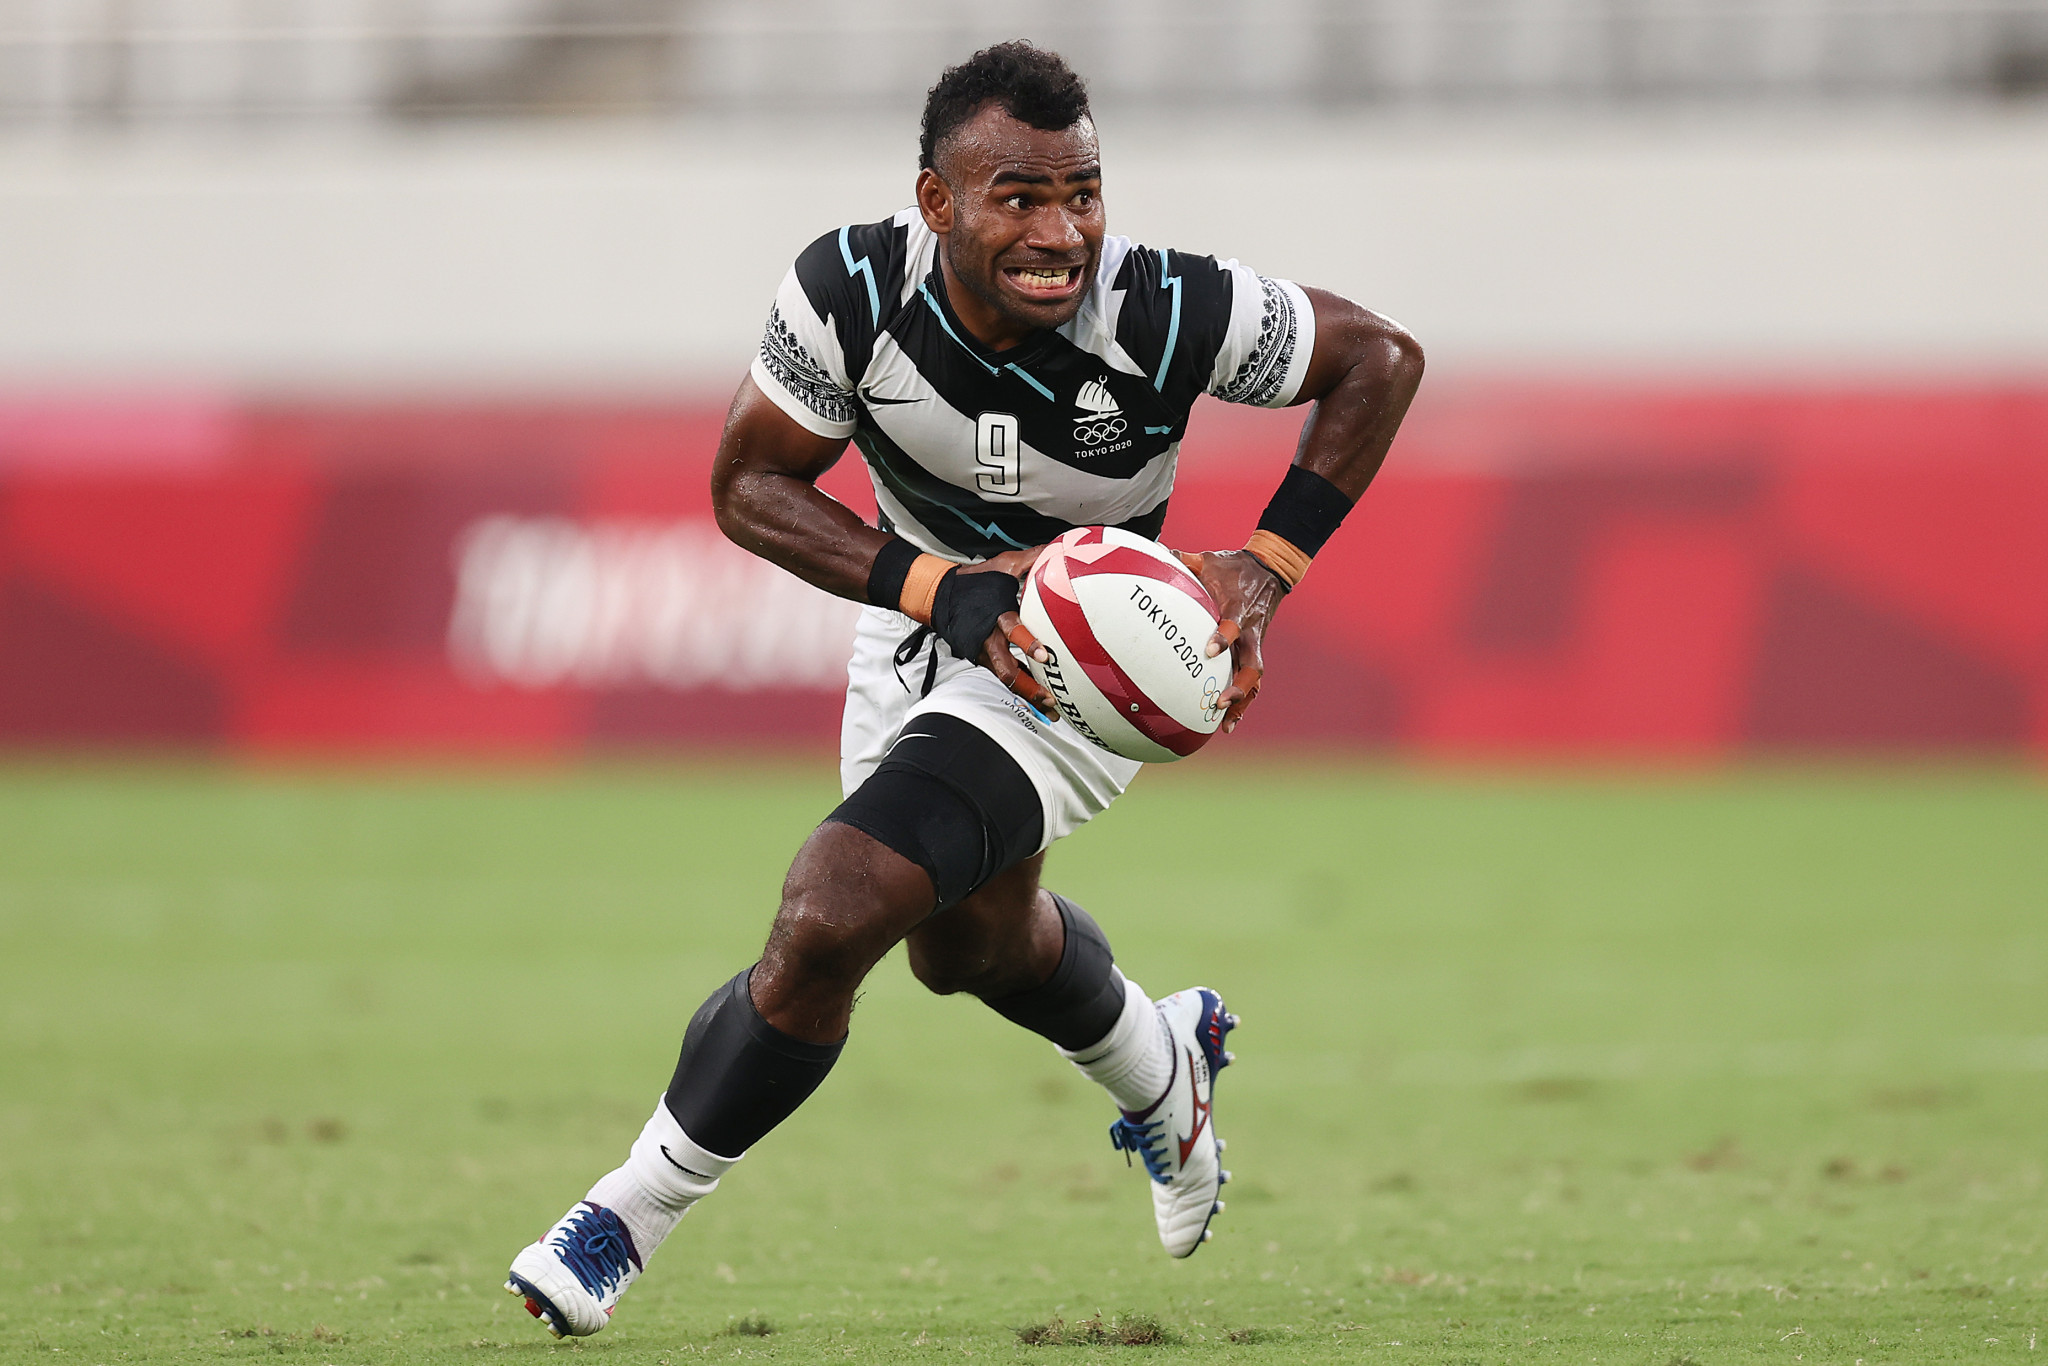 Fiji are hopeful Jerry Tuwai will help them to secure a third consecutive Olympic rugby gold medal in Paris. GETTY IMAGES